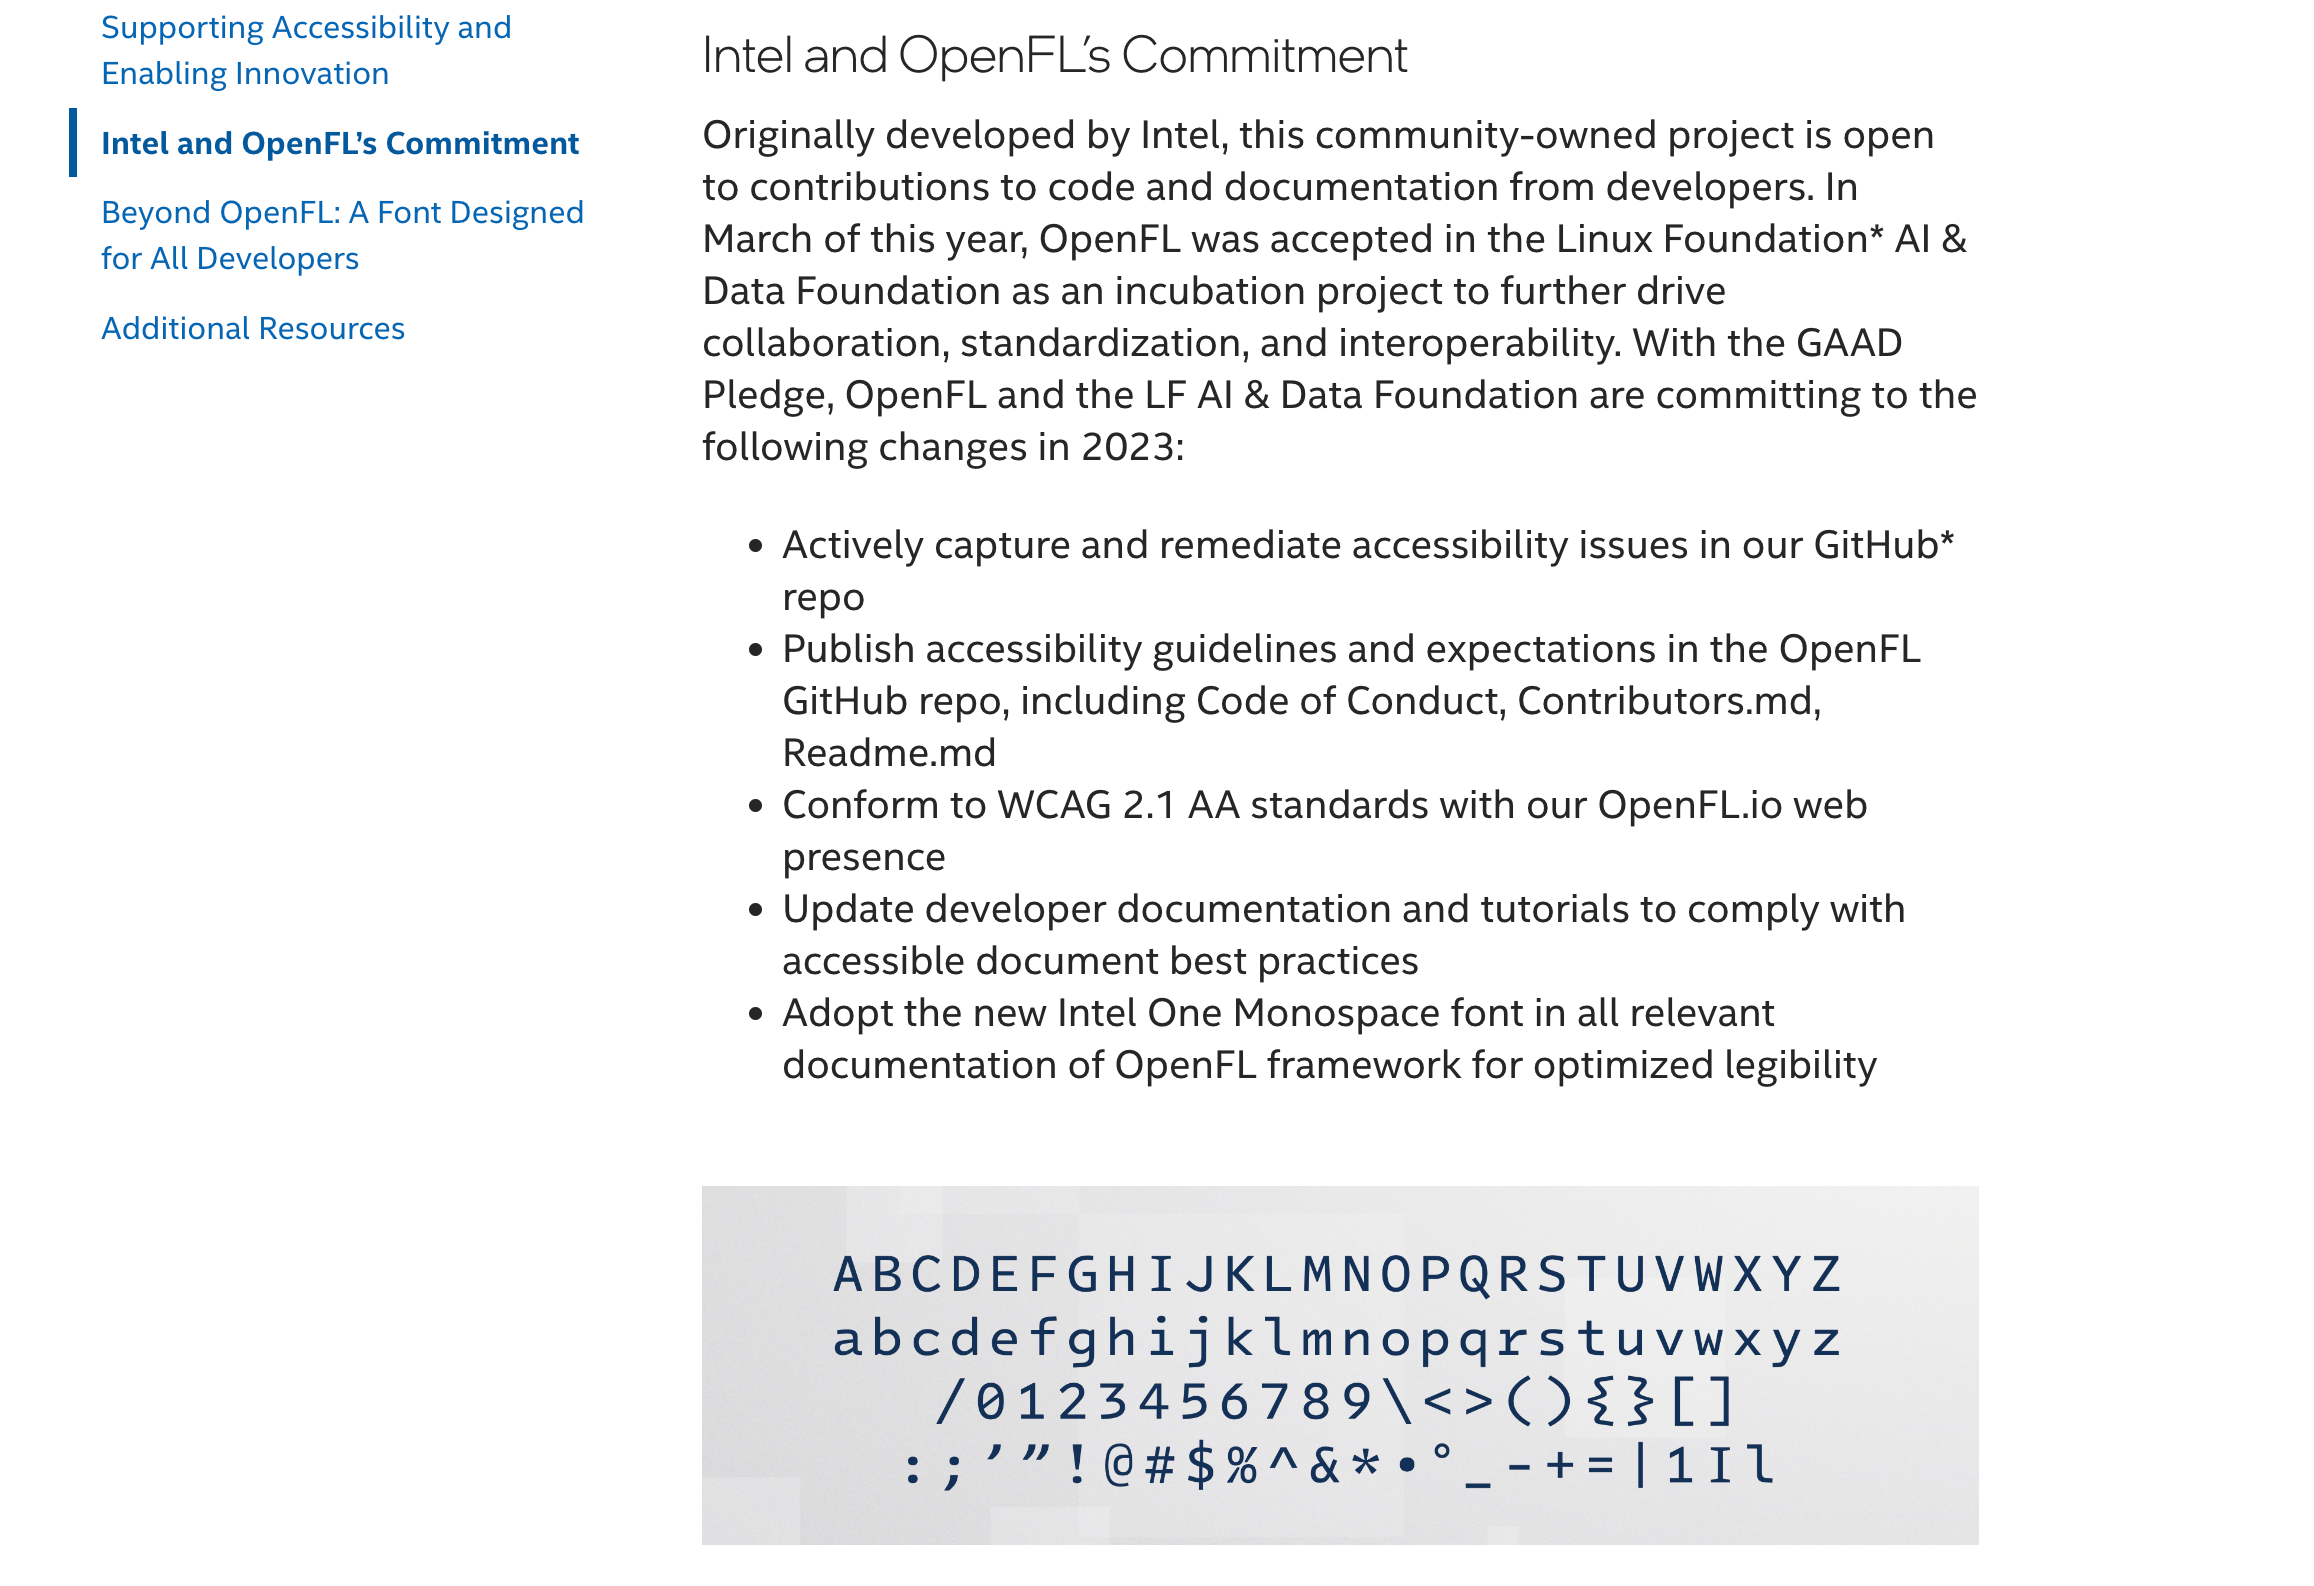 Screenshot of Intel blog post about taking the GAAD Pledge with an image of their newly designed monospace font